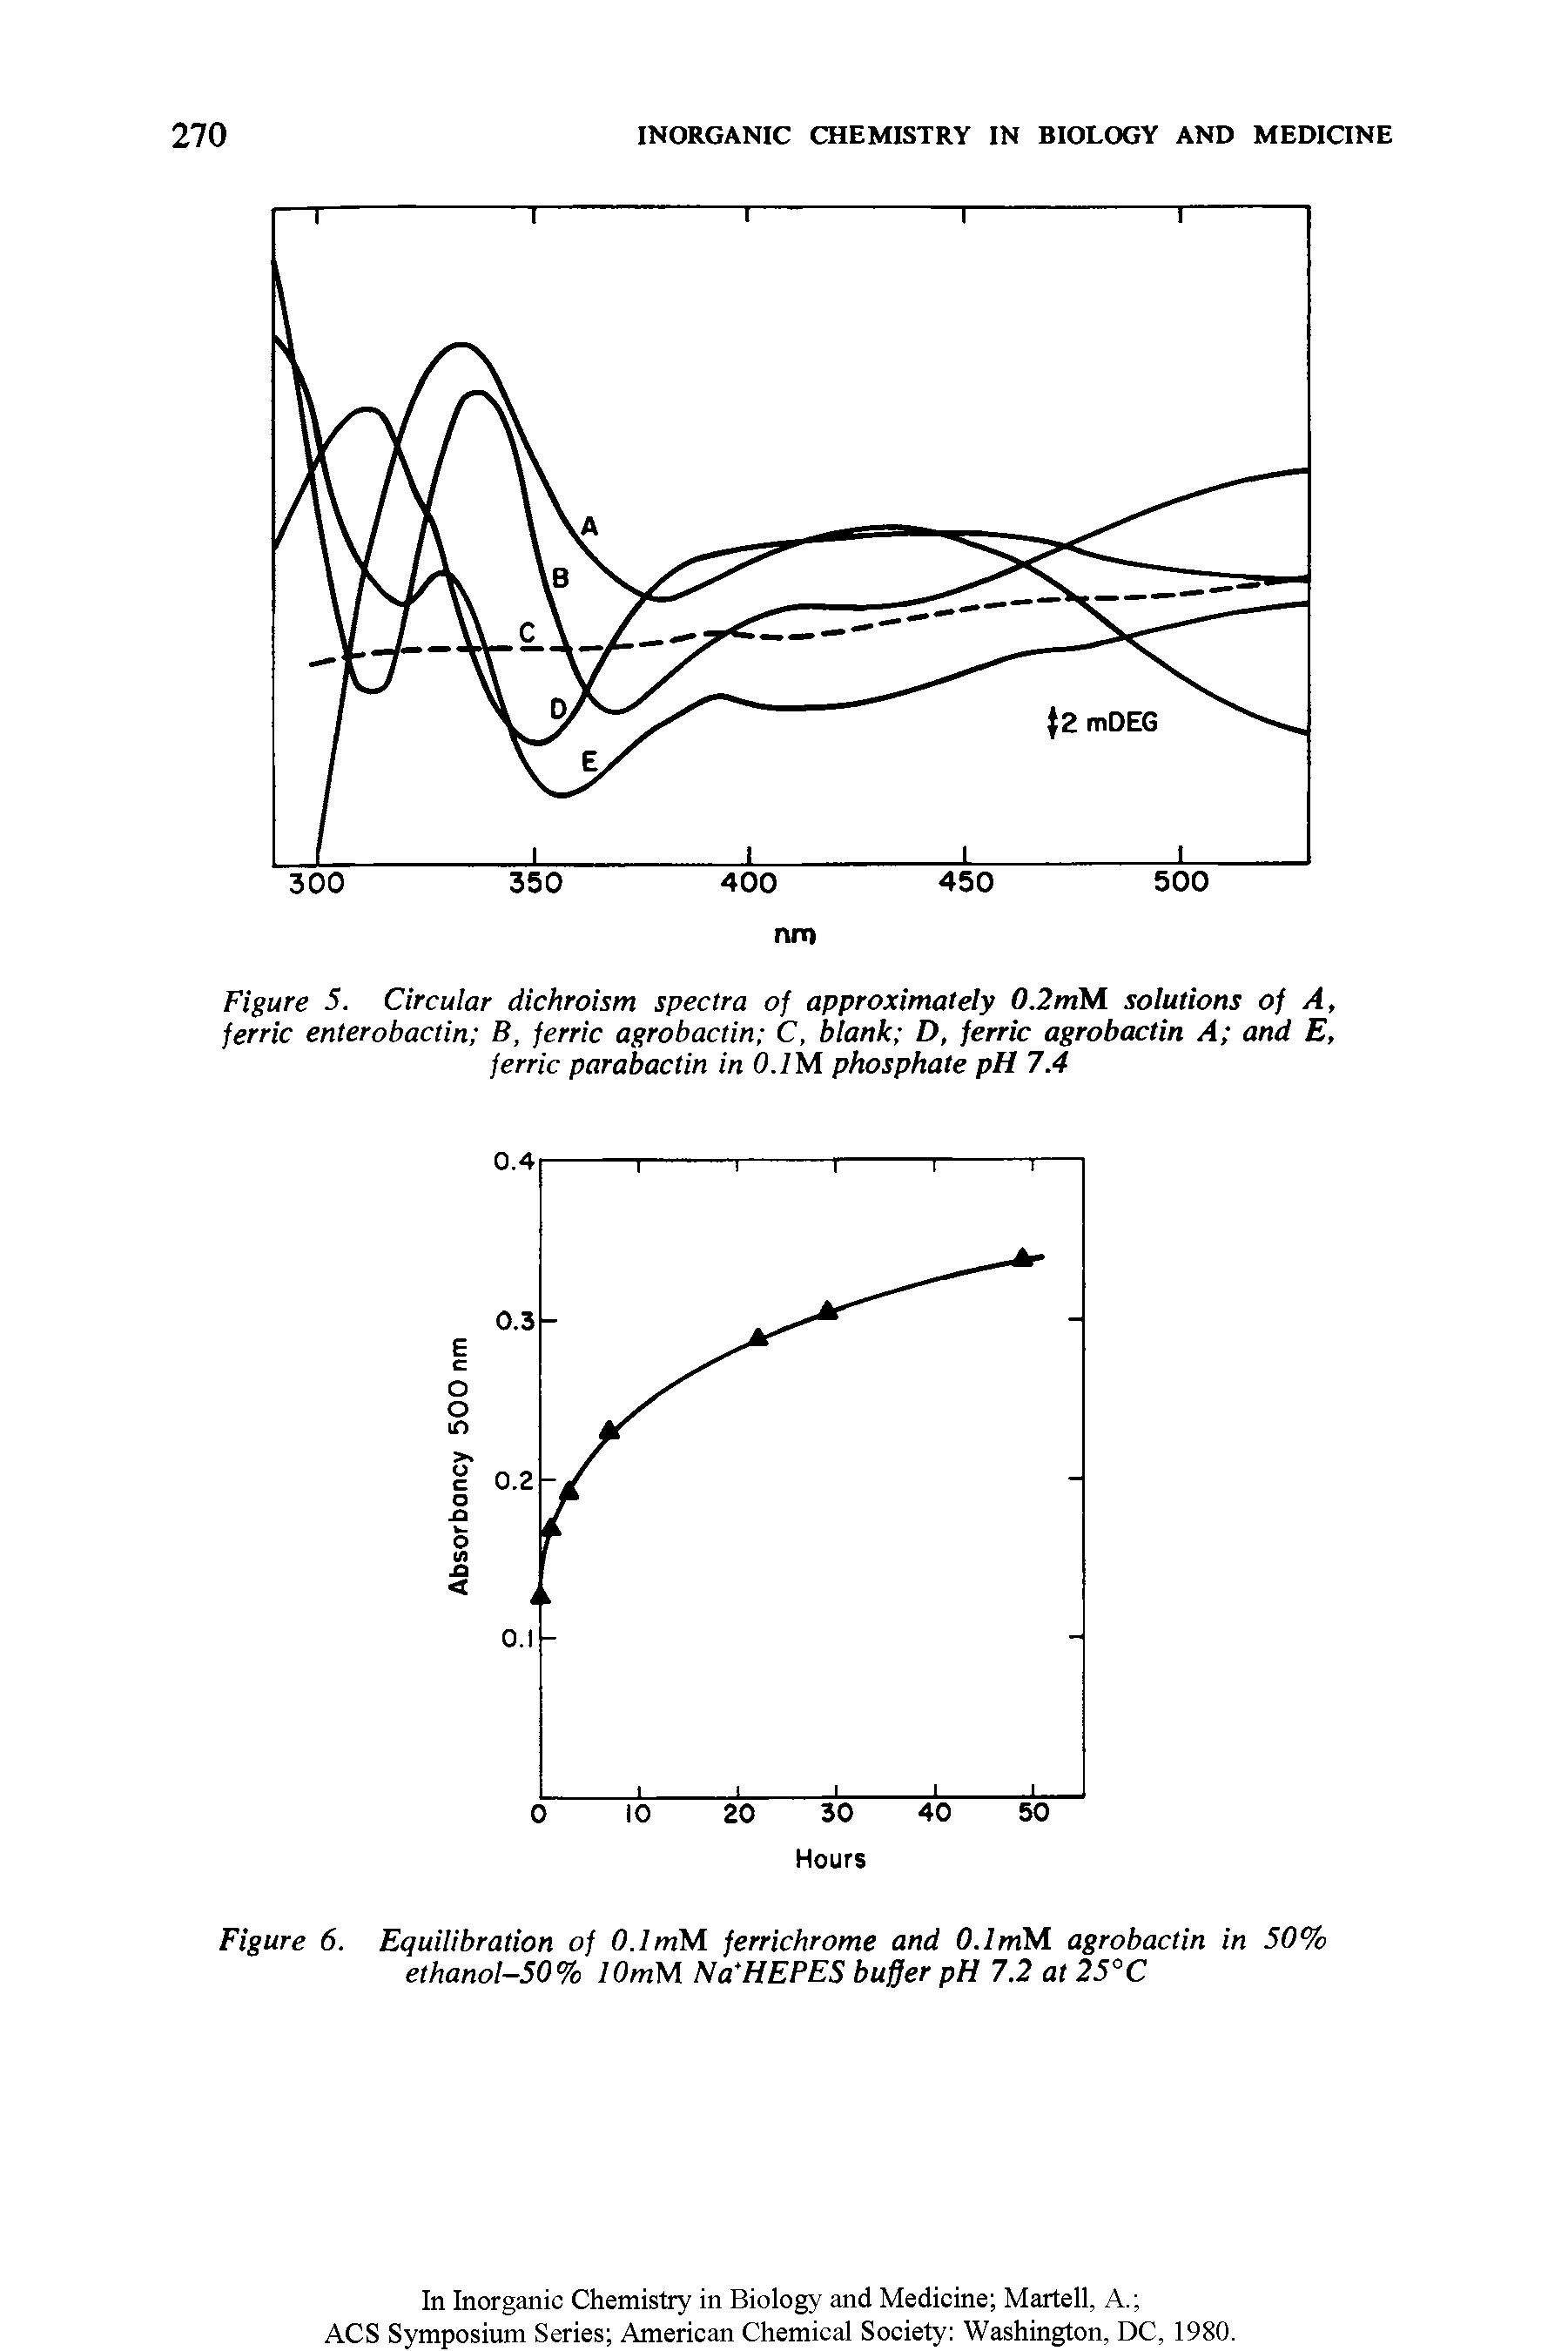 Figure 5. Circular dichroism spectra of approximately 0.2mM solutions of A, ferric enterobactin B, ferric agrobactin C, blank D, ferric agrobactin A and E, ferric parabactin in O.IM phosphate pH 7.4...